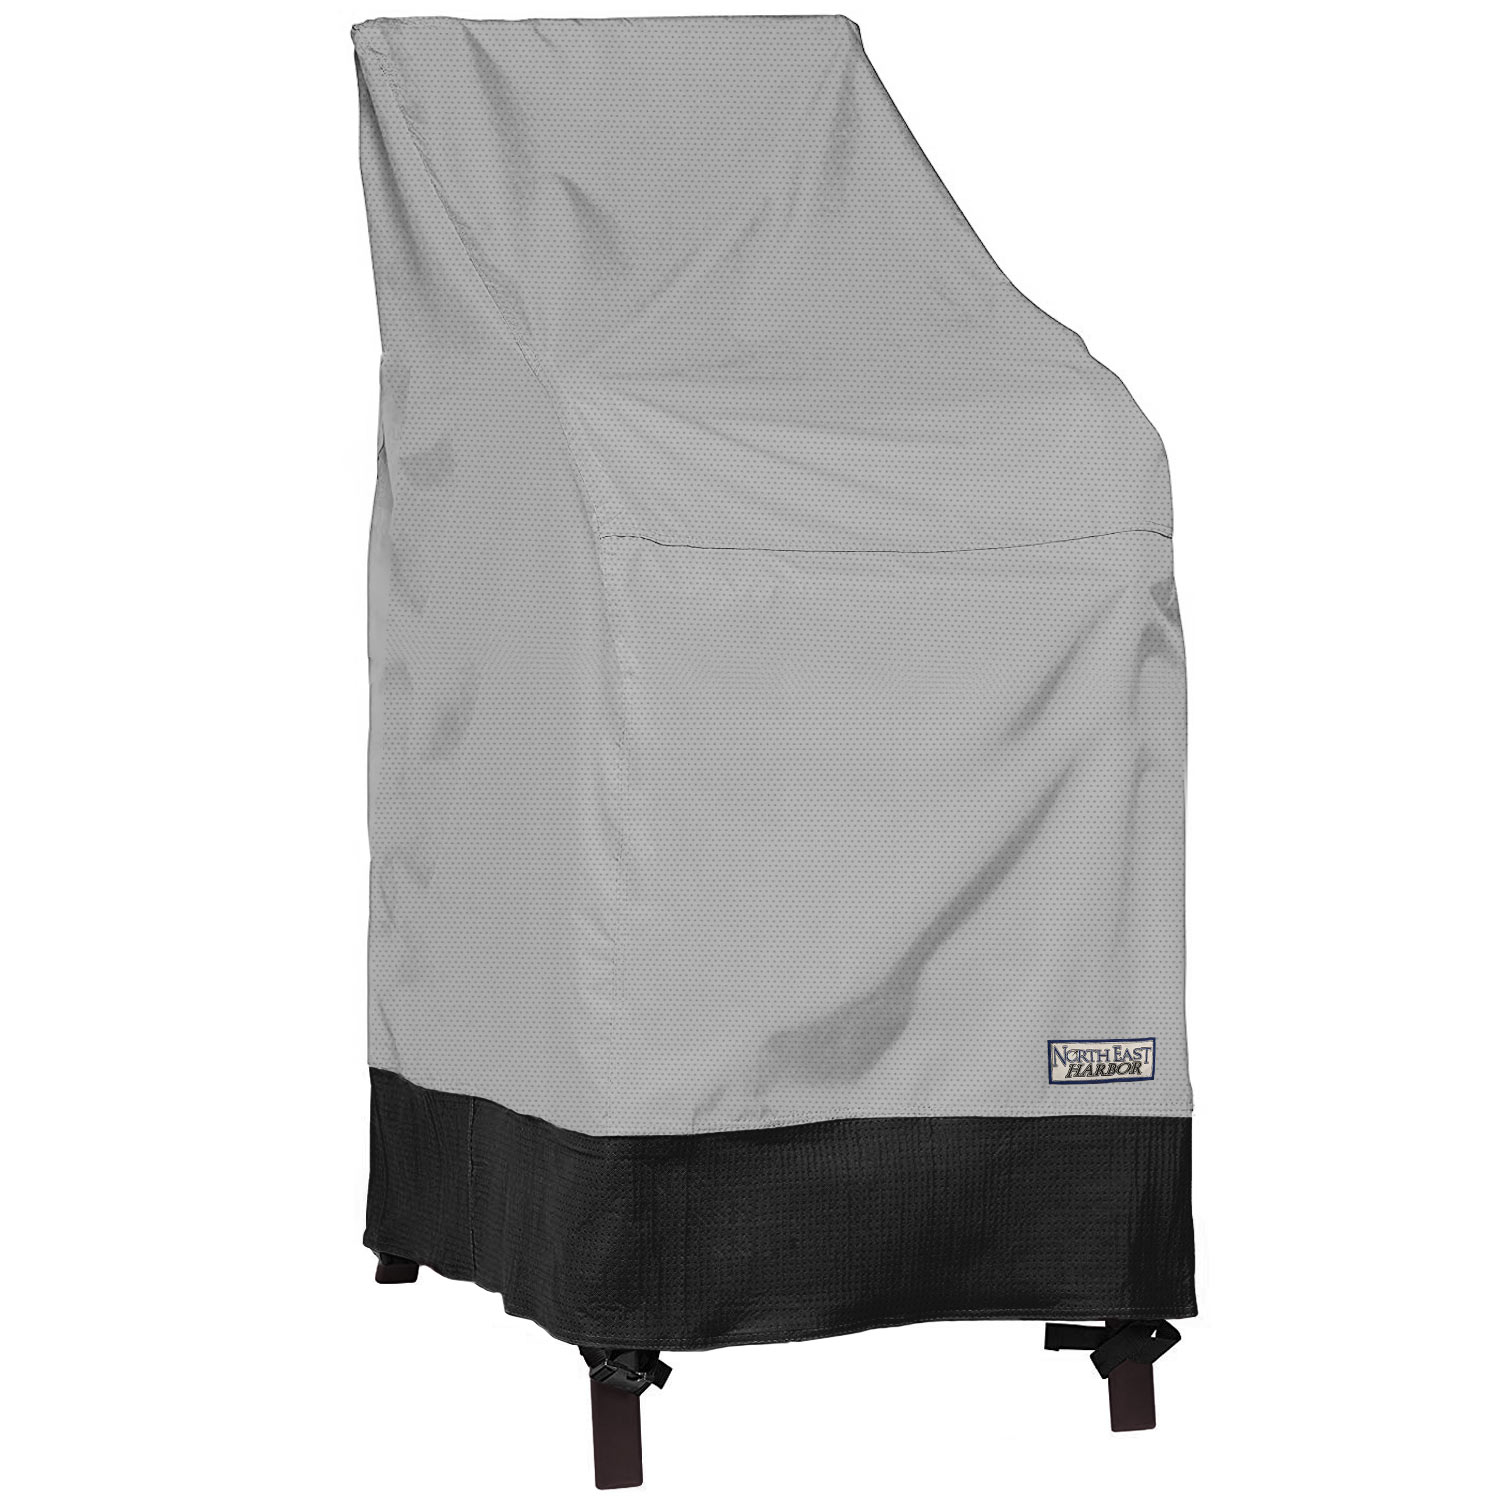 Details About Outdoor Stackable Chair Patio Furniture Cover 28w X 30d X 49h Grayblack within size 1500 X 1500